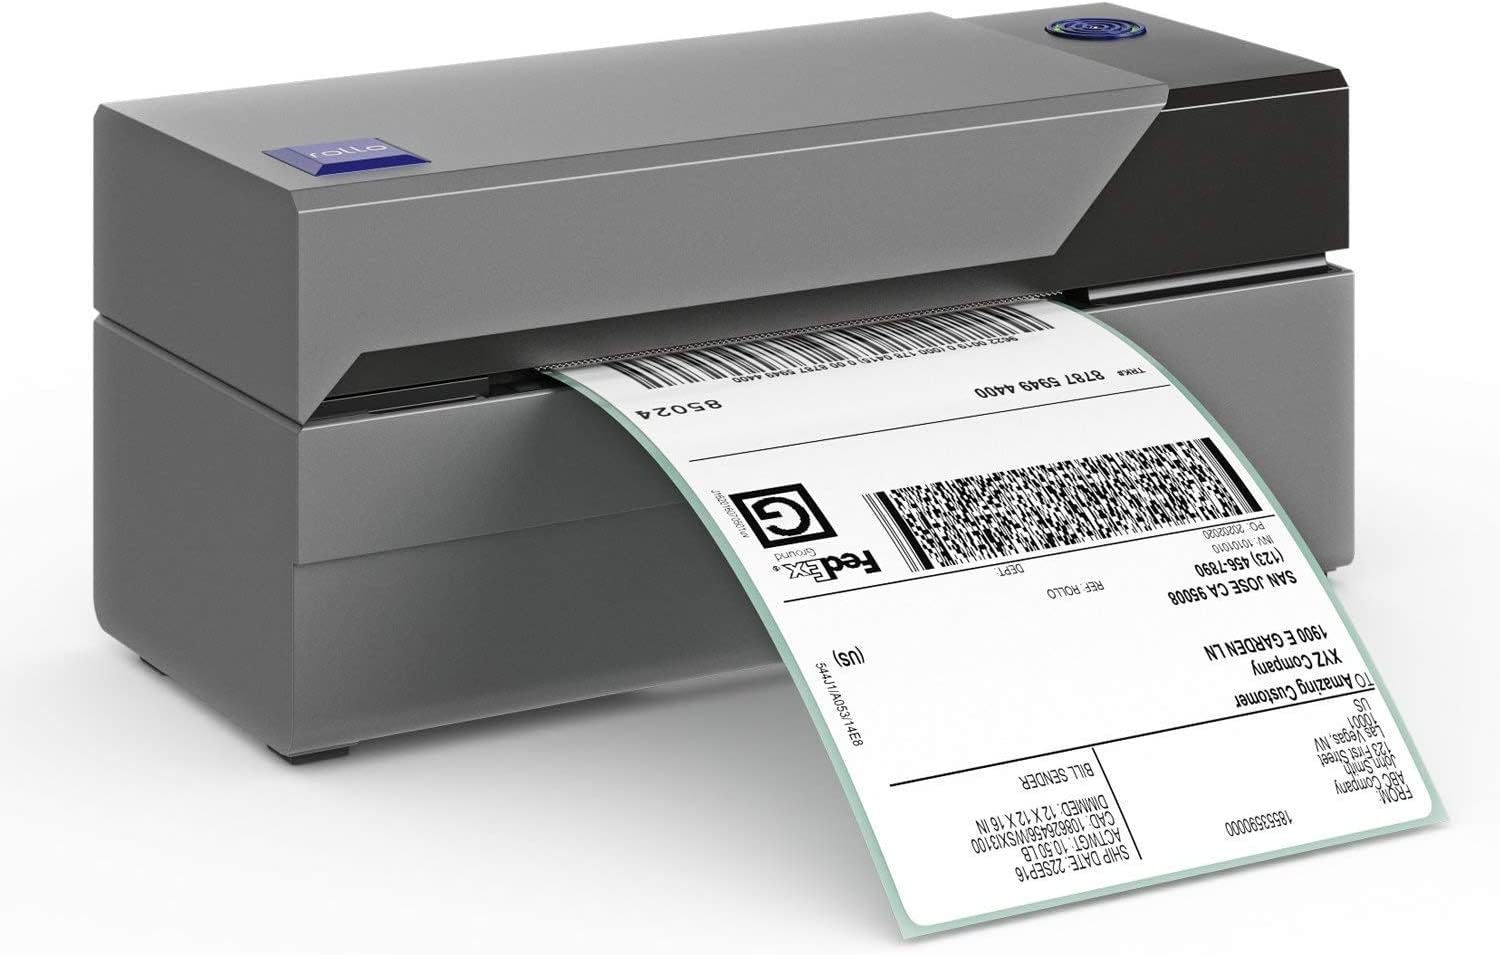 Rollo USB Shipping Thermal Label Printer 4x6 2x1 FBA FBM for PC and Mac $159.99